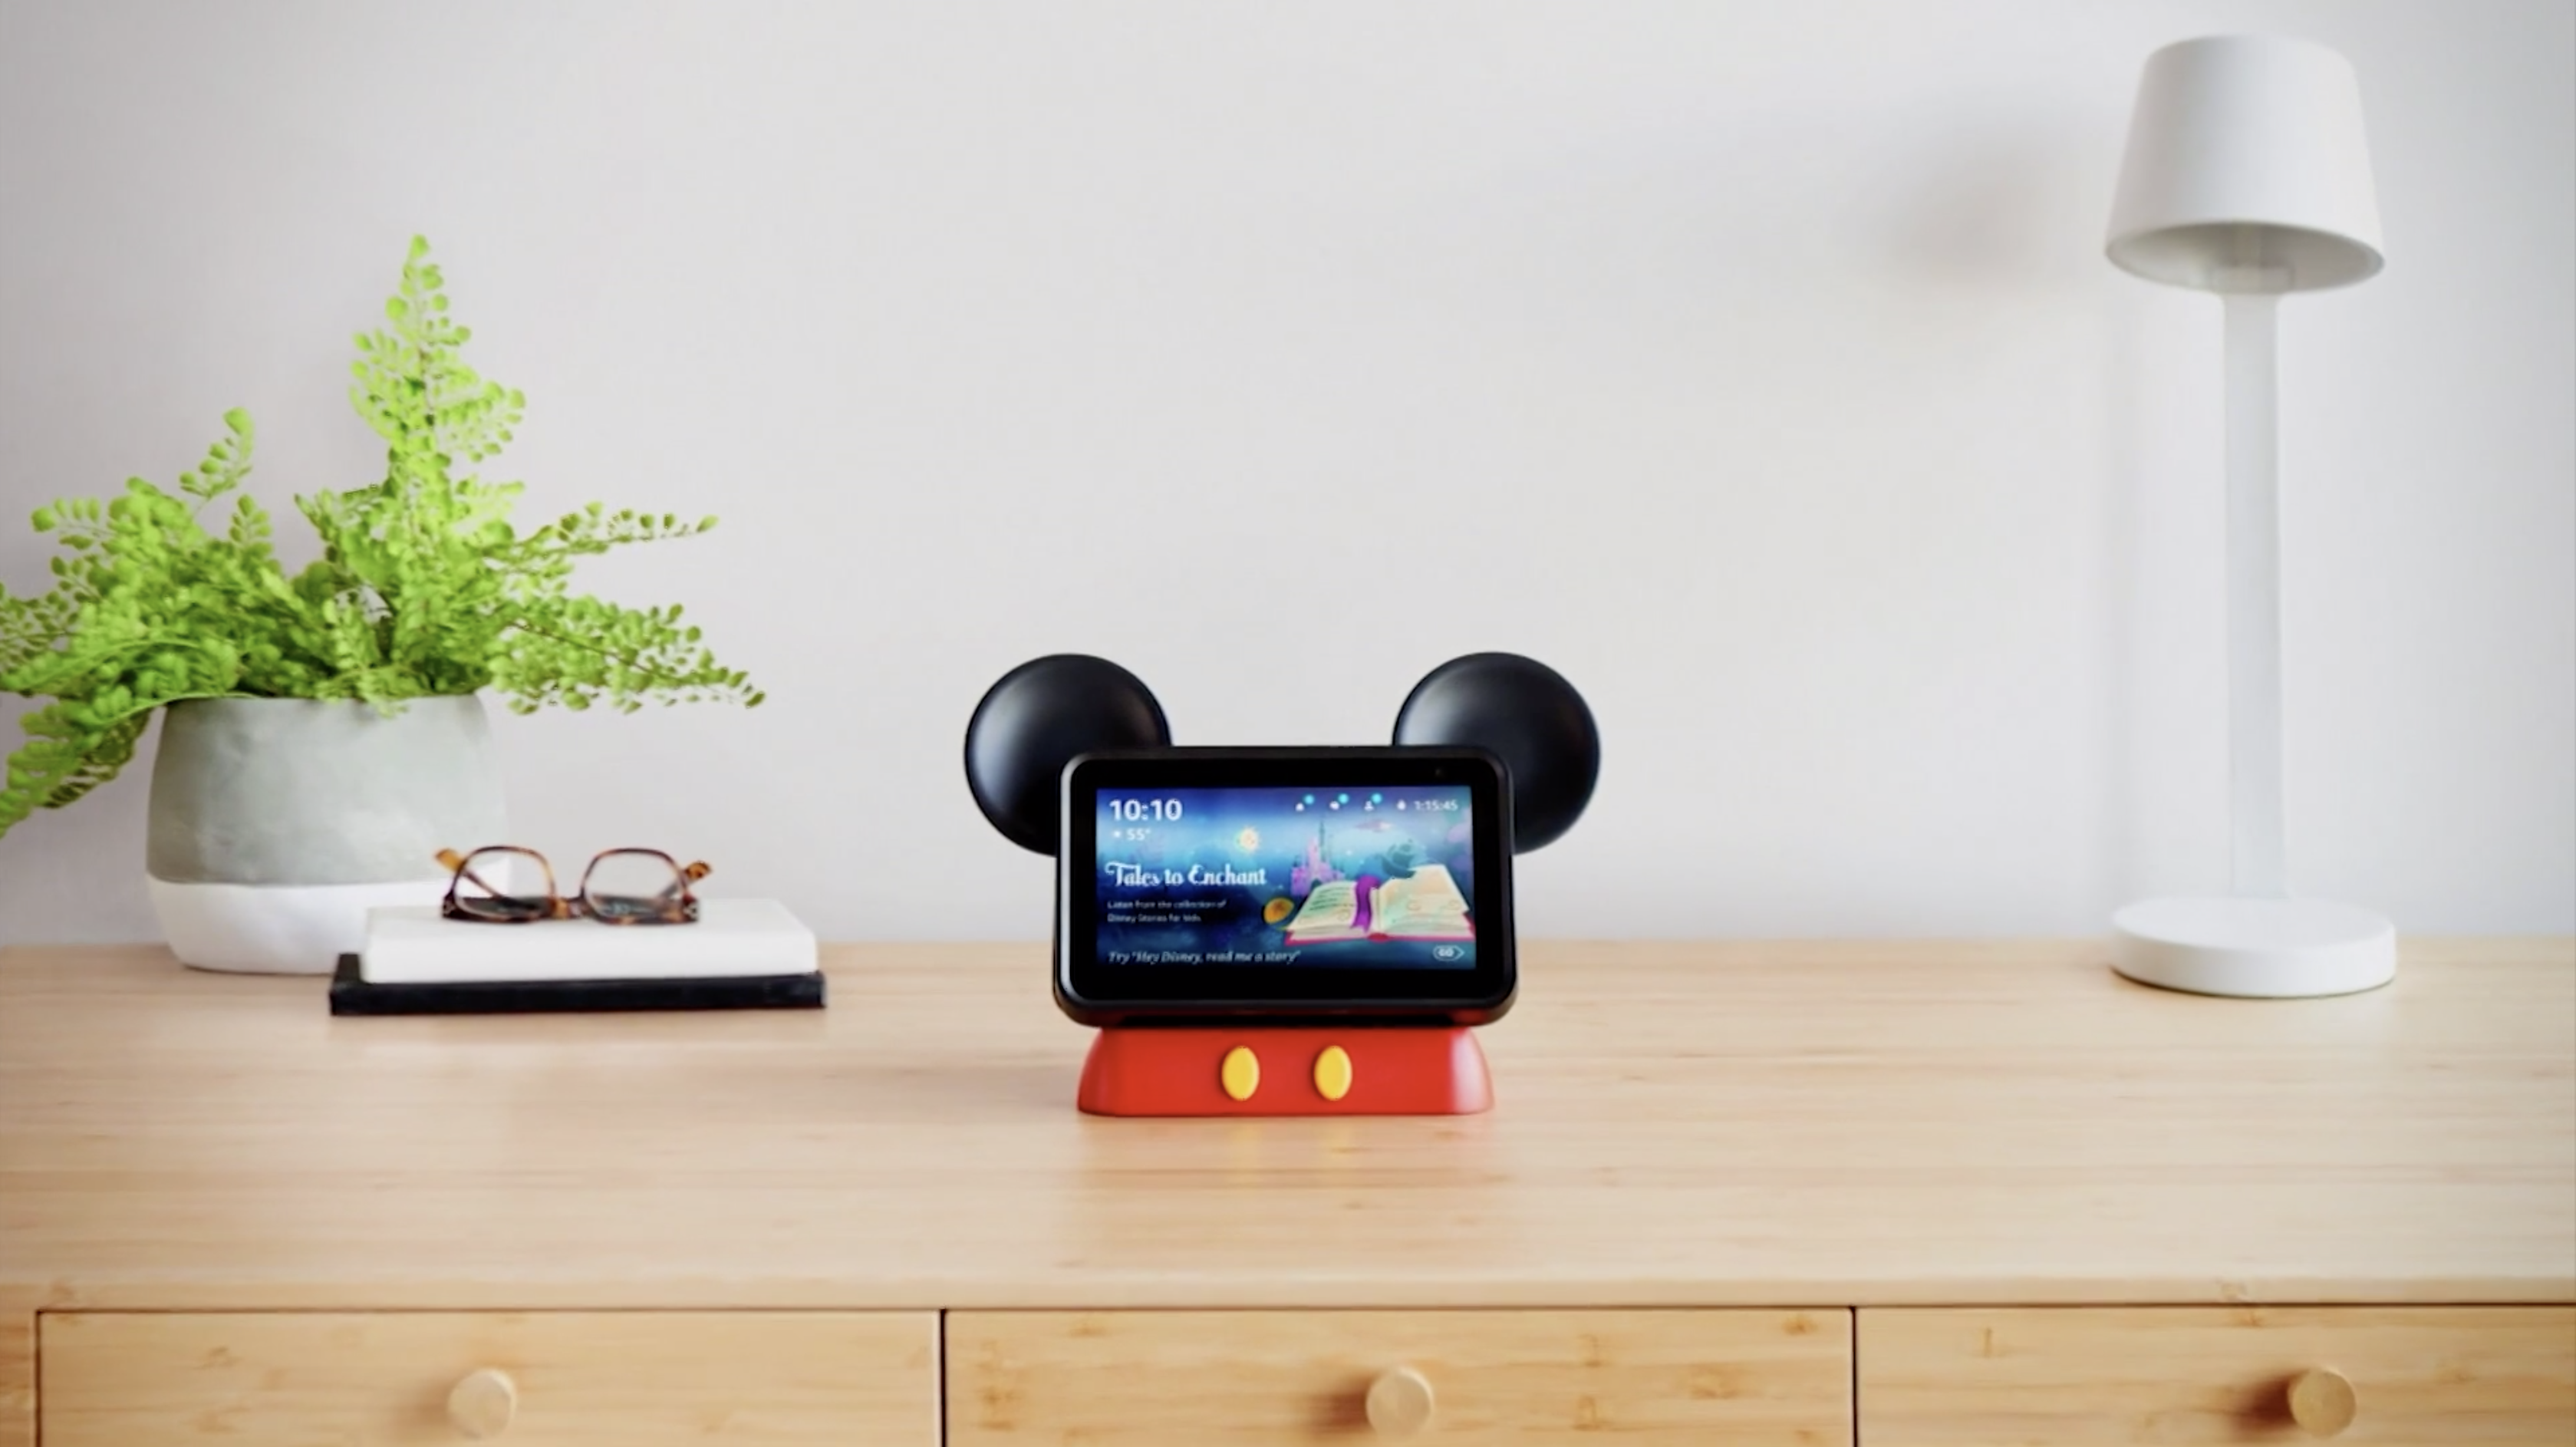 Mickey inspired stand in Echo Show 5 shown off at Amazon event